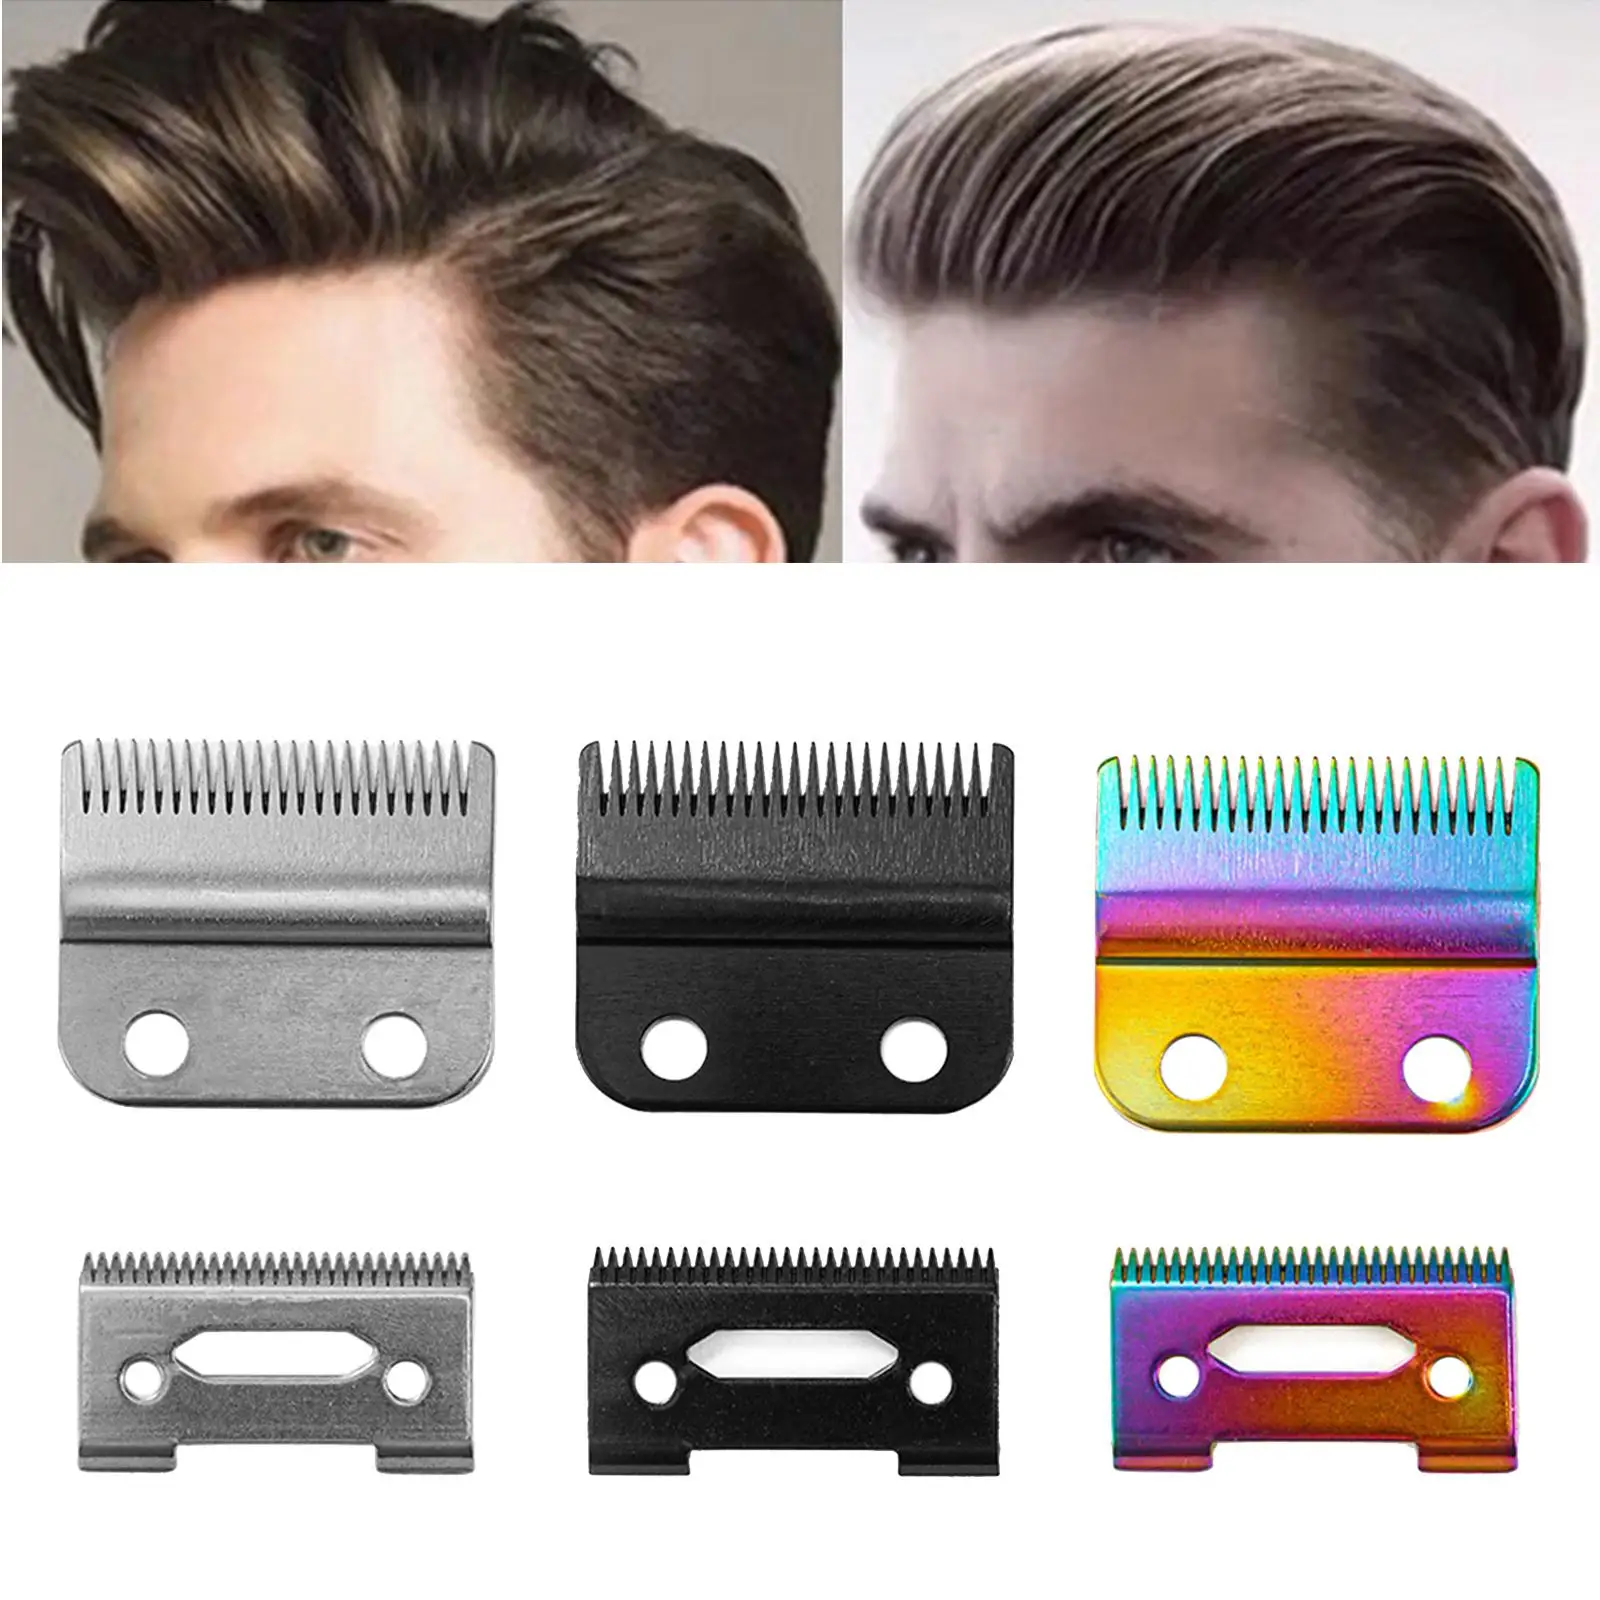 Hair Trimmer Cutter Blade Replaces for WAHL 8504 8148 1919 Premium